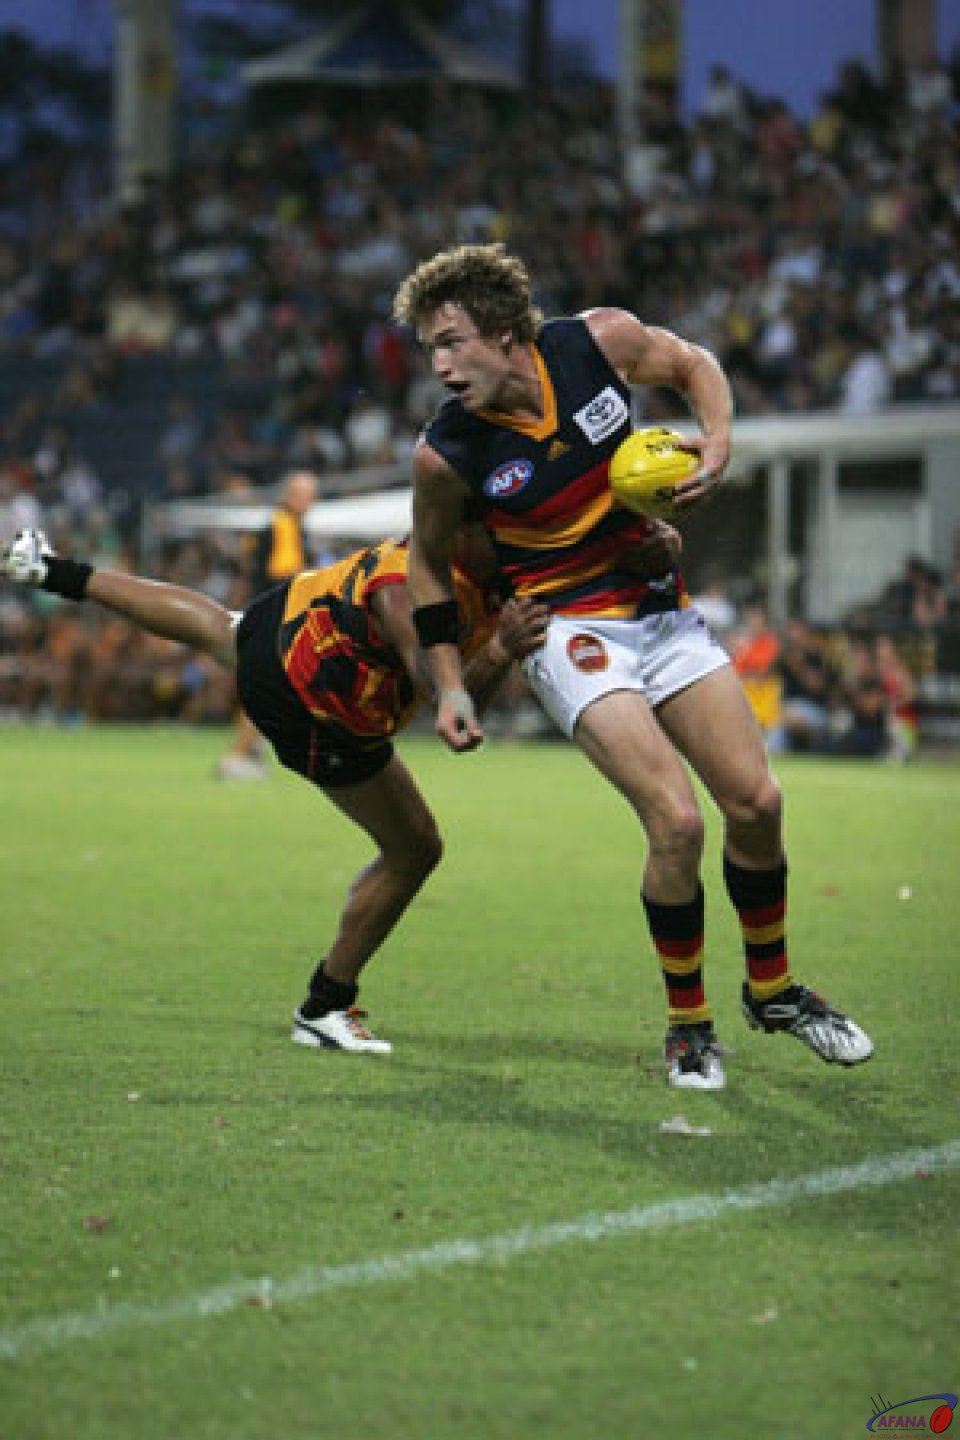 Crows No Match for All Stars